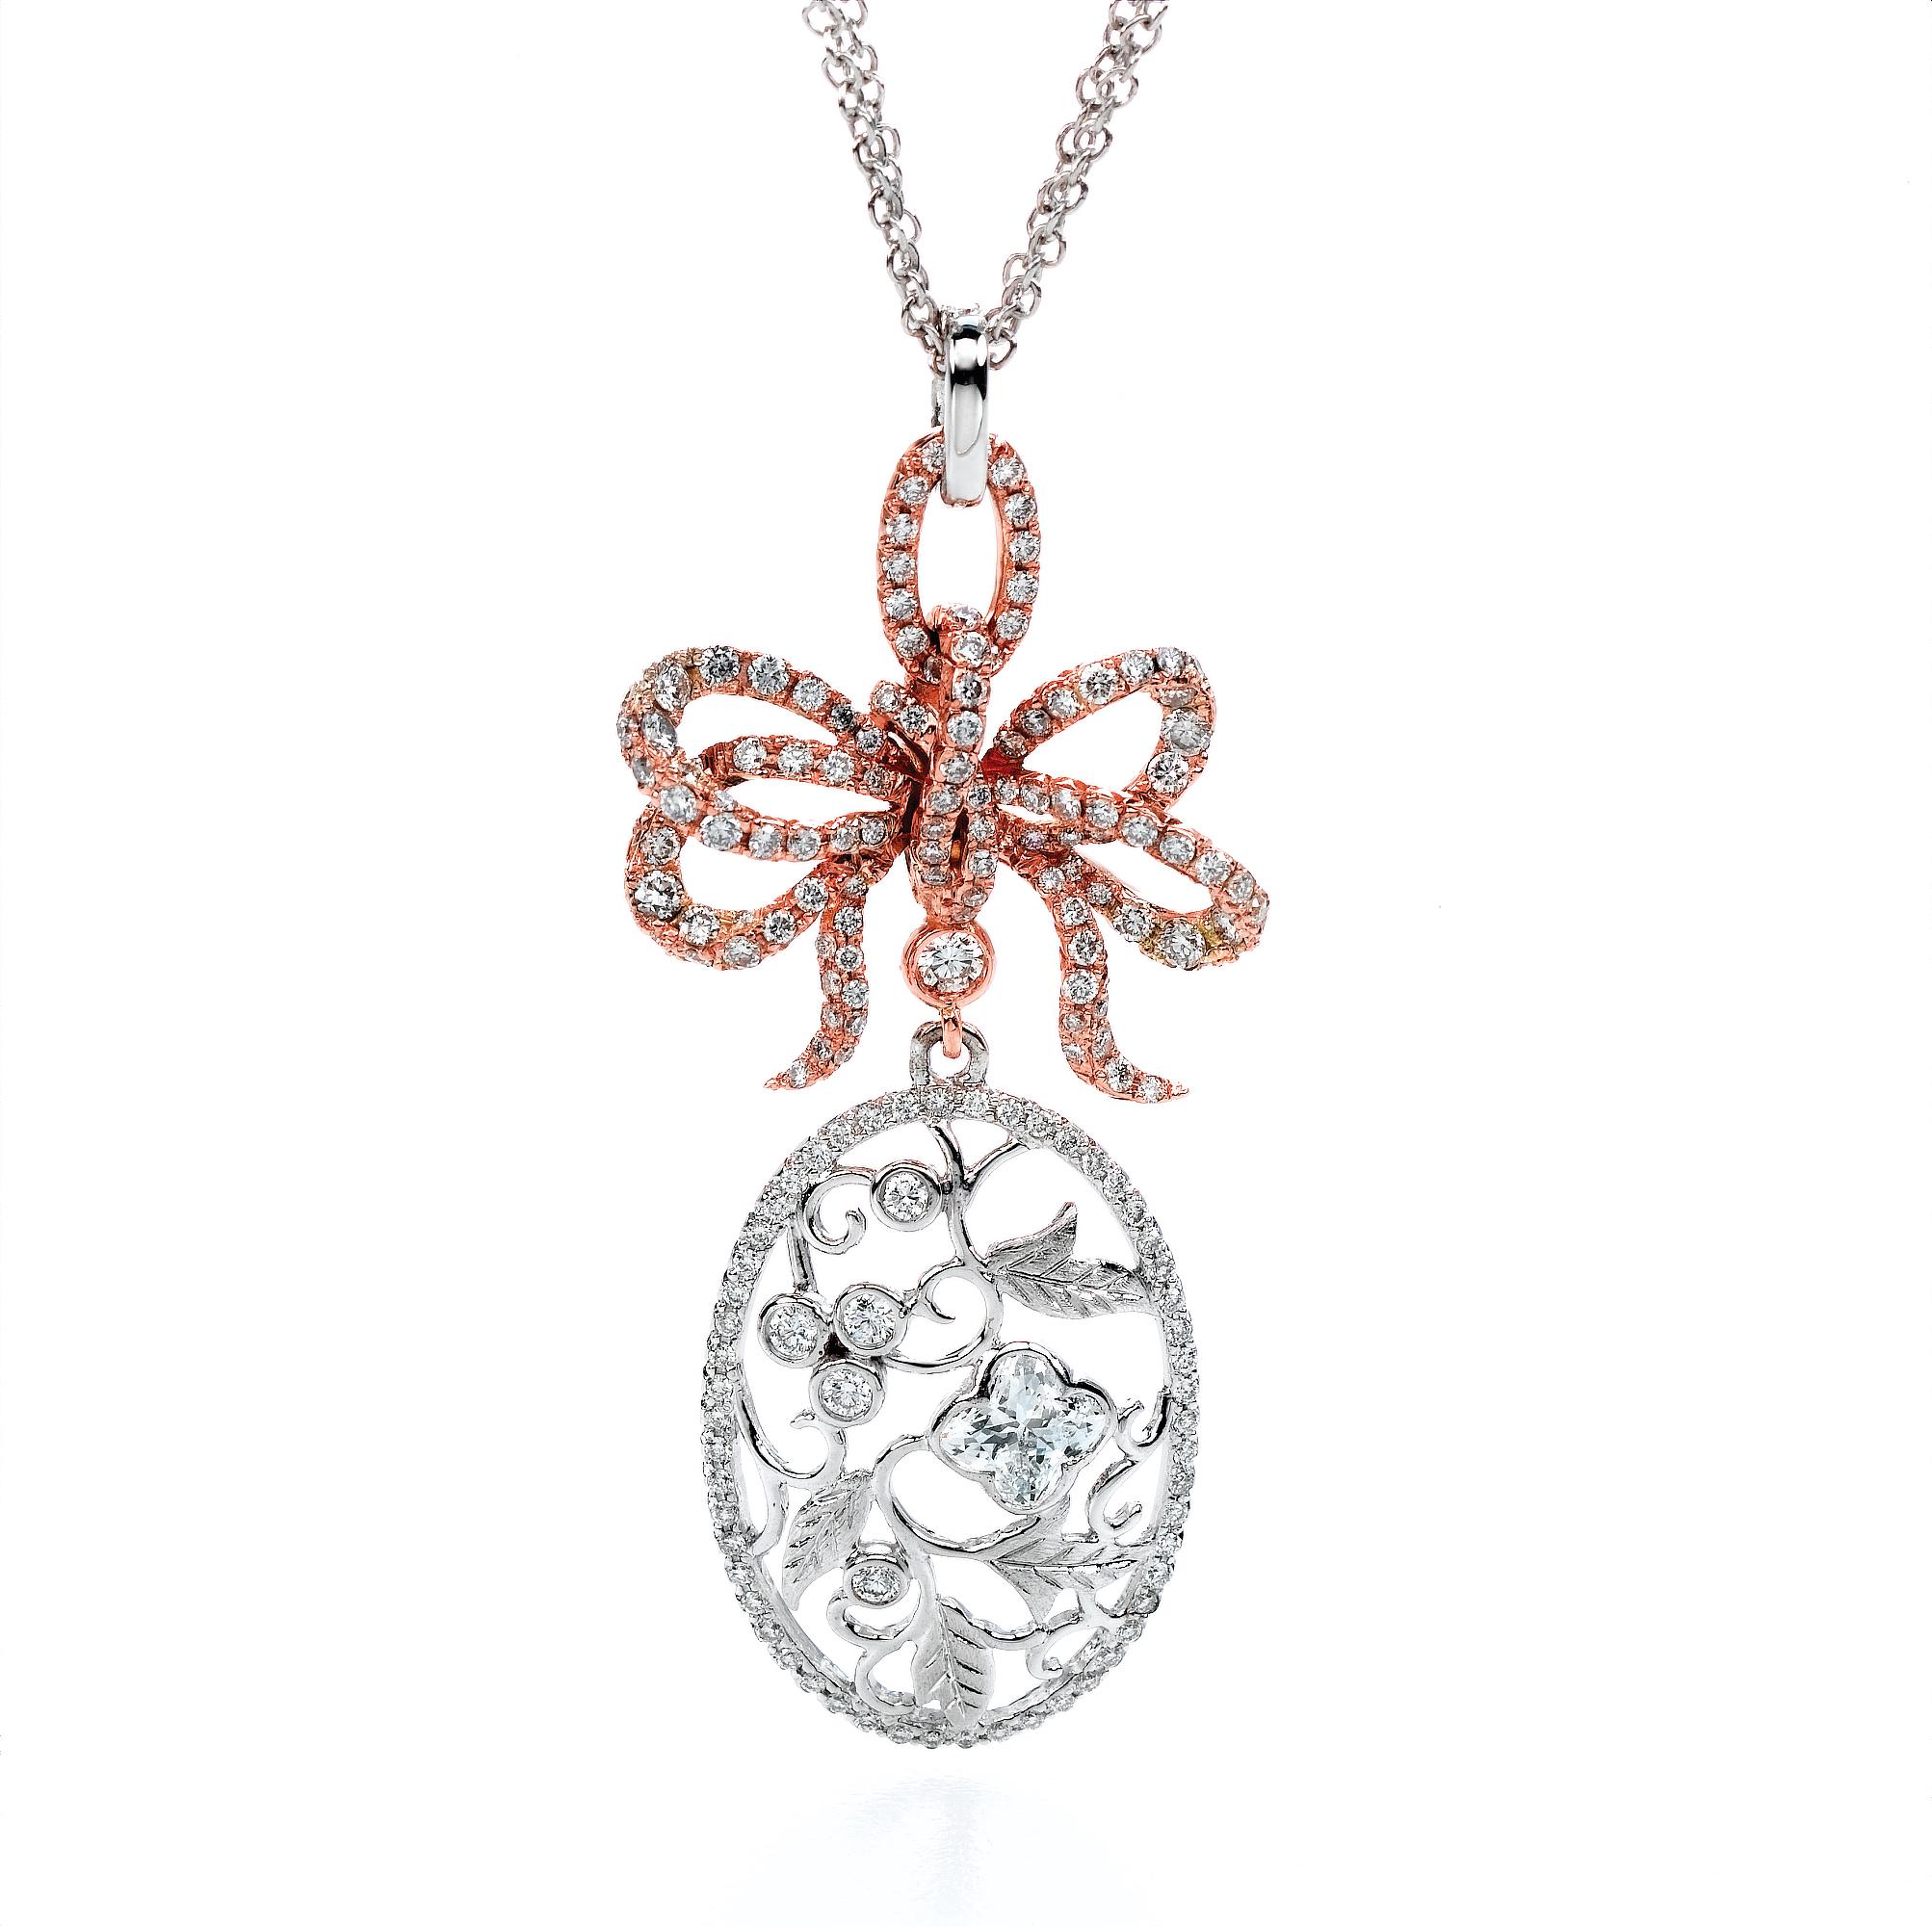 18KT white and rose gold bouquet  diamond flower pendant.  .1 LILY CUT ® flower shape diamond H color VS SI clarity  0.50cts . additional 1.22 ct round diamond accent . overall length of drop  2 inch. 5 cm .  overall size 17 inch necklace with a 2